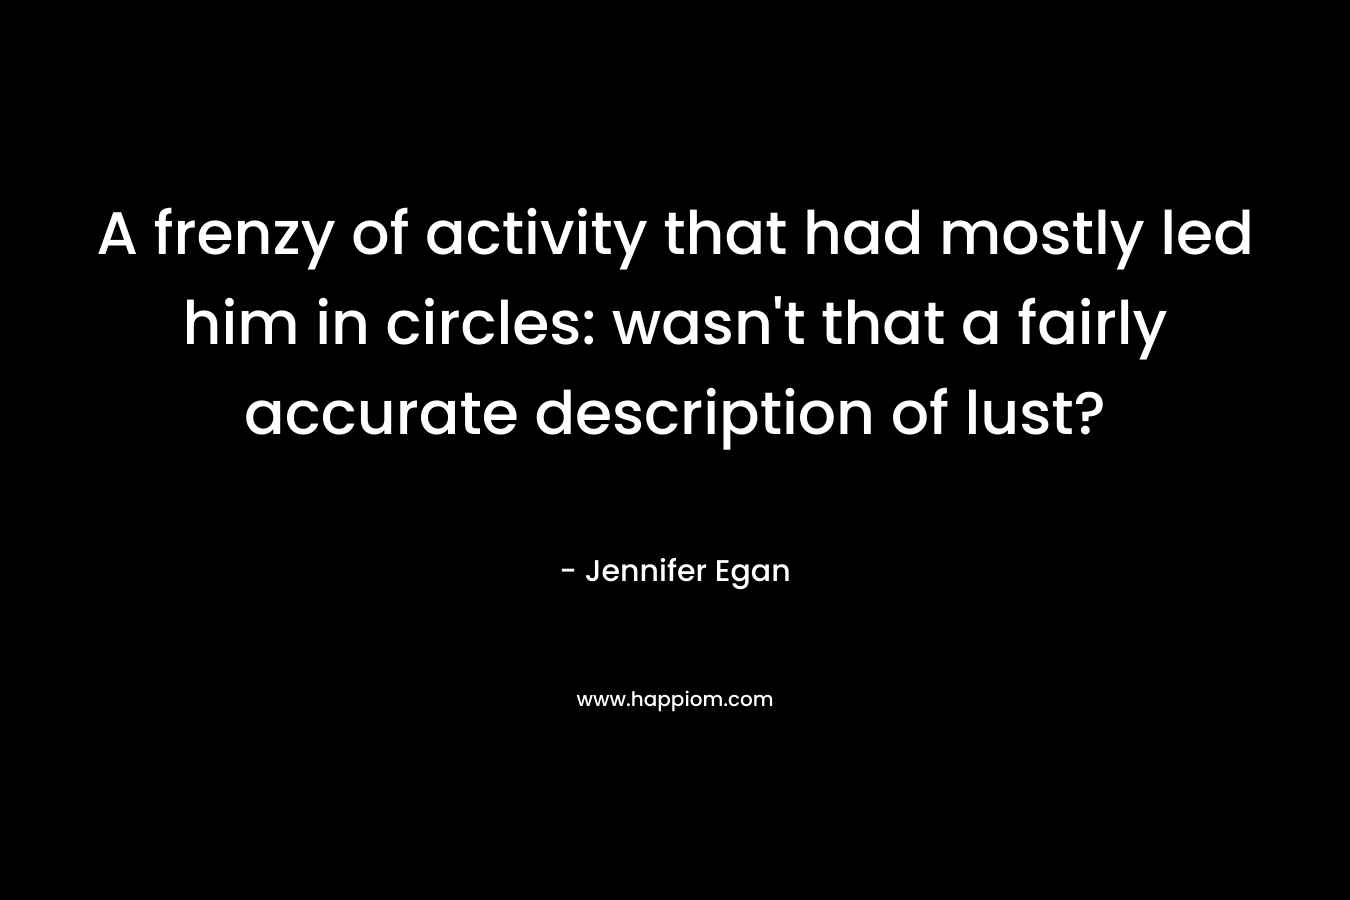 A frenzy of activity that had mostly led him in circles: wasn’t that a fairly accurate description of lust? – Jennifer Egan